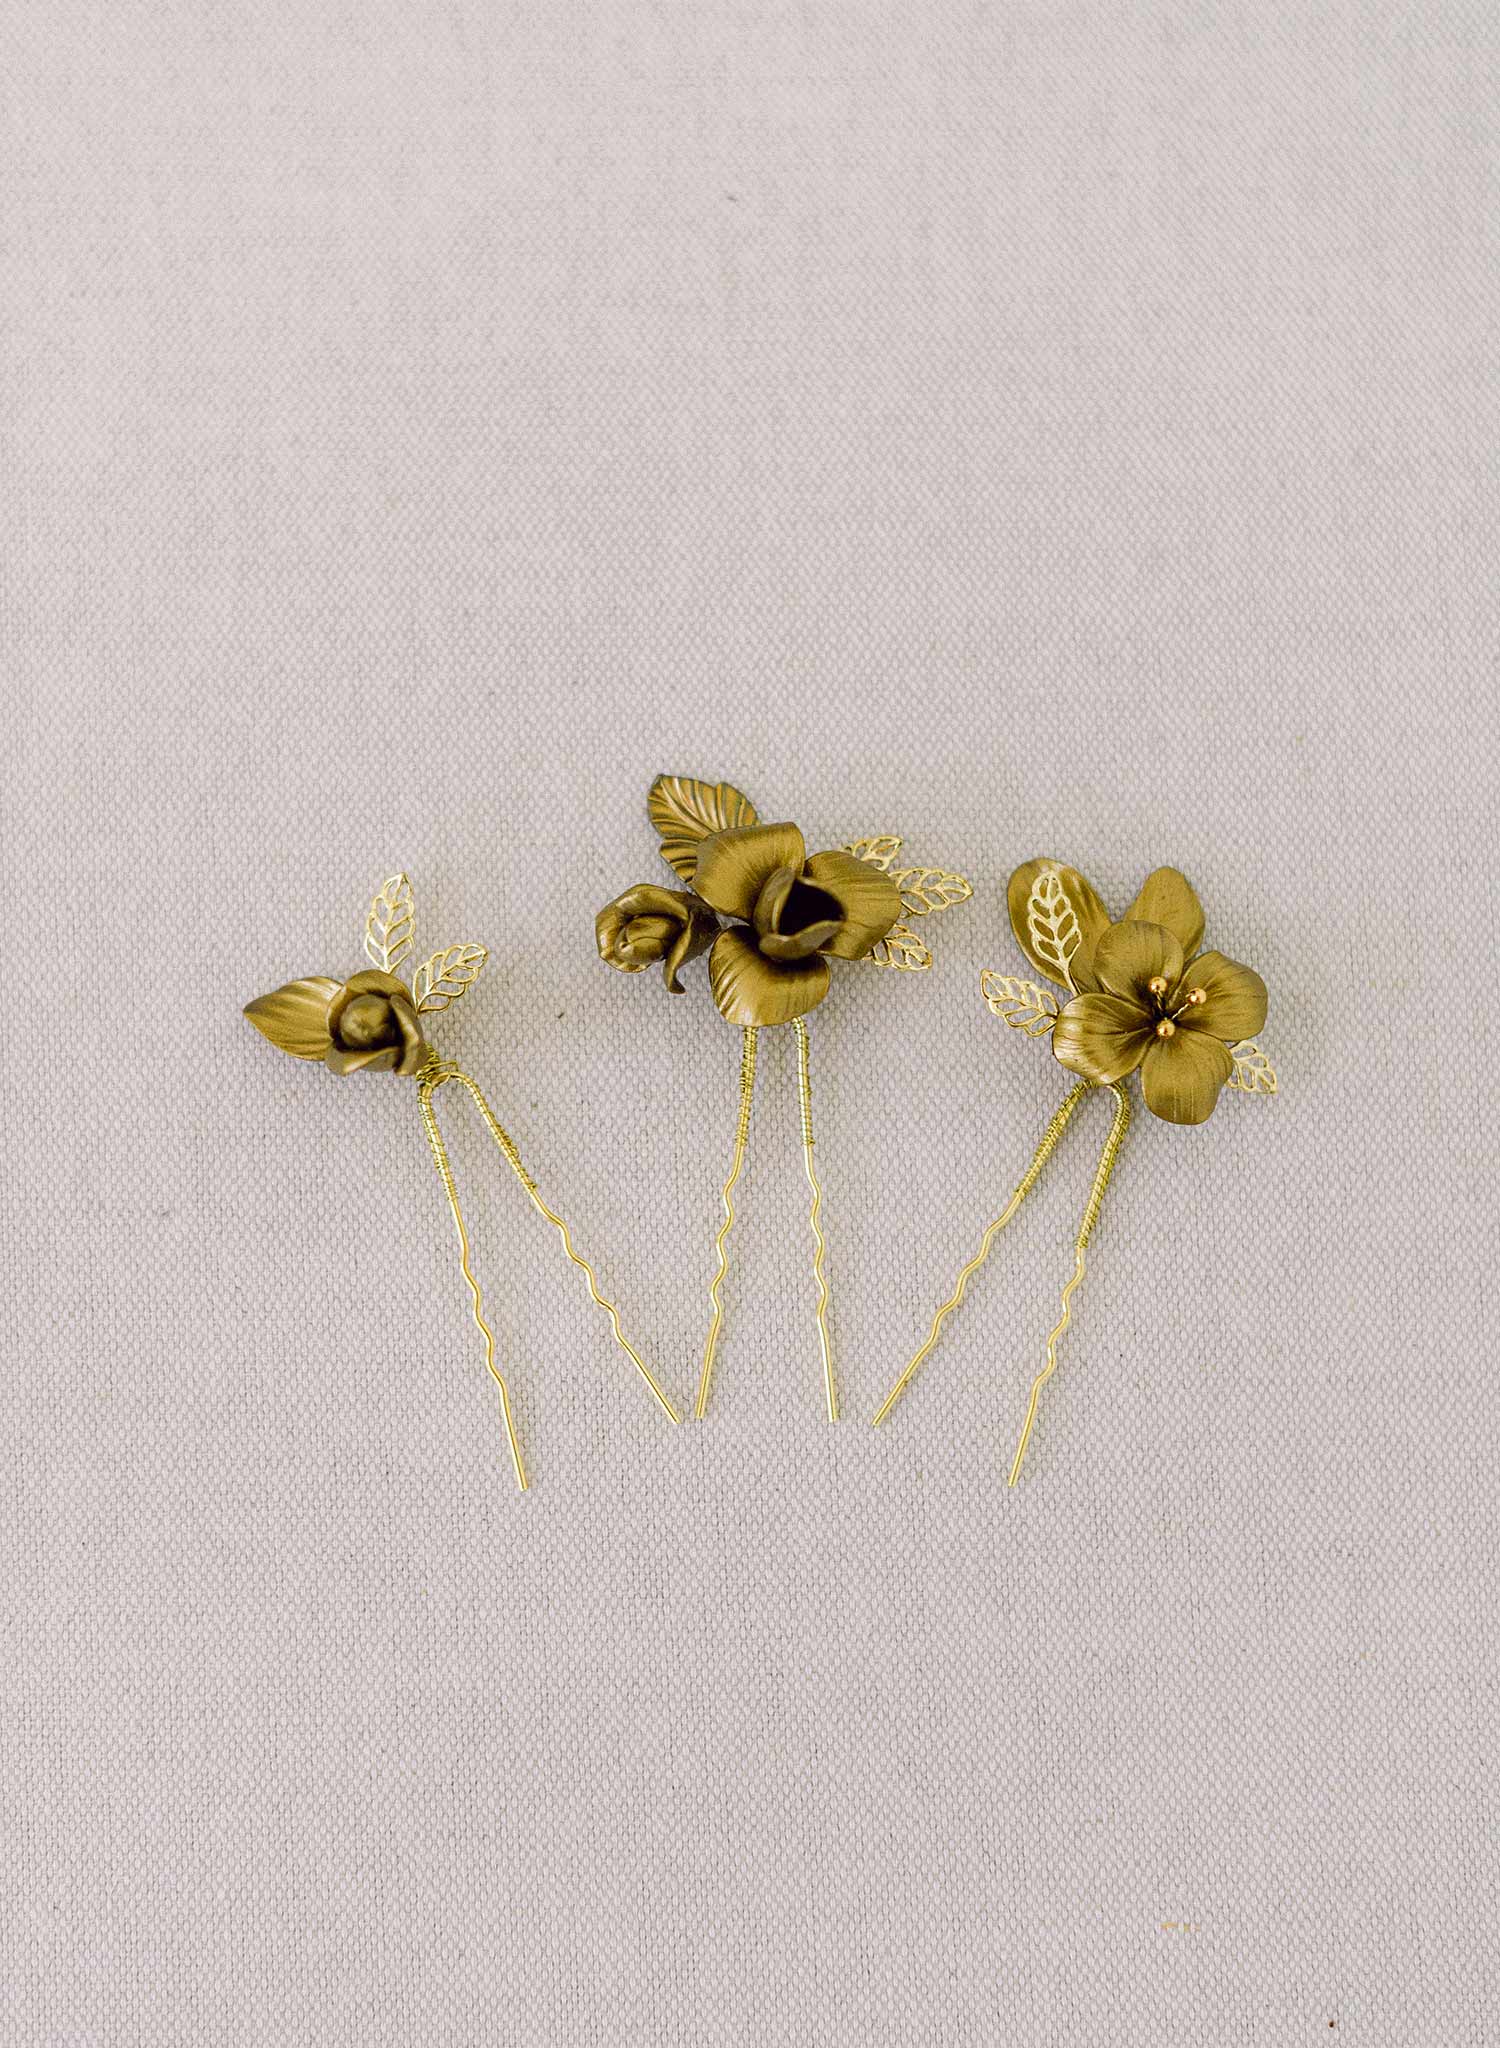 Petite gilded blossoms hair pin set of 3 - Style #2325